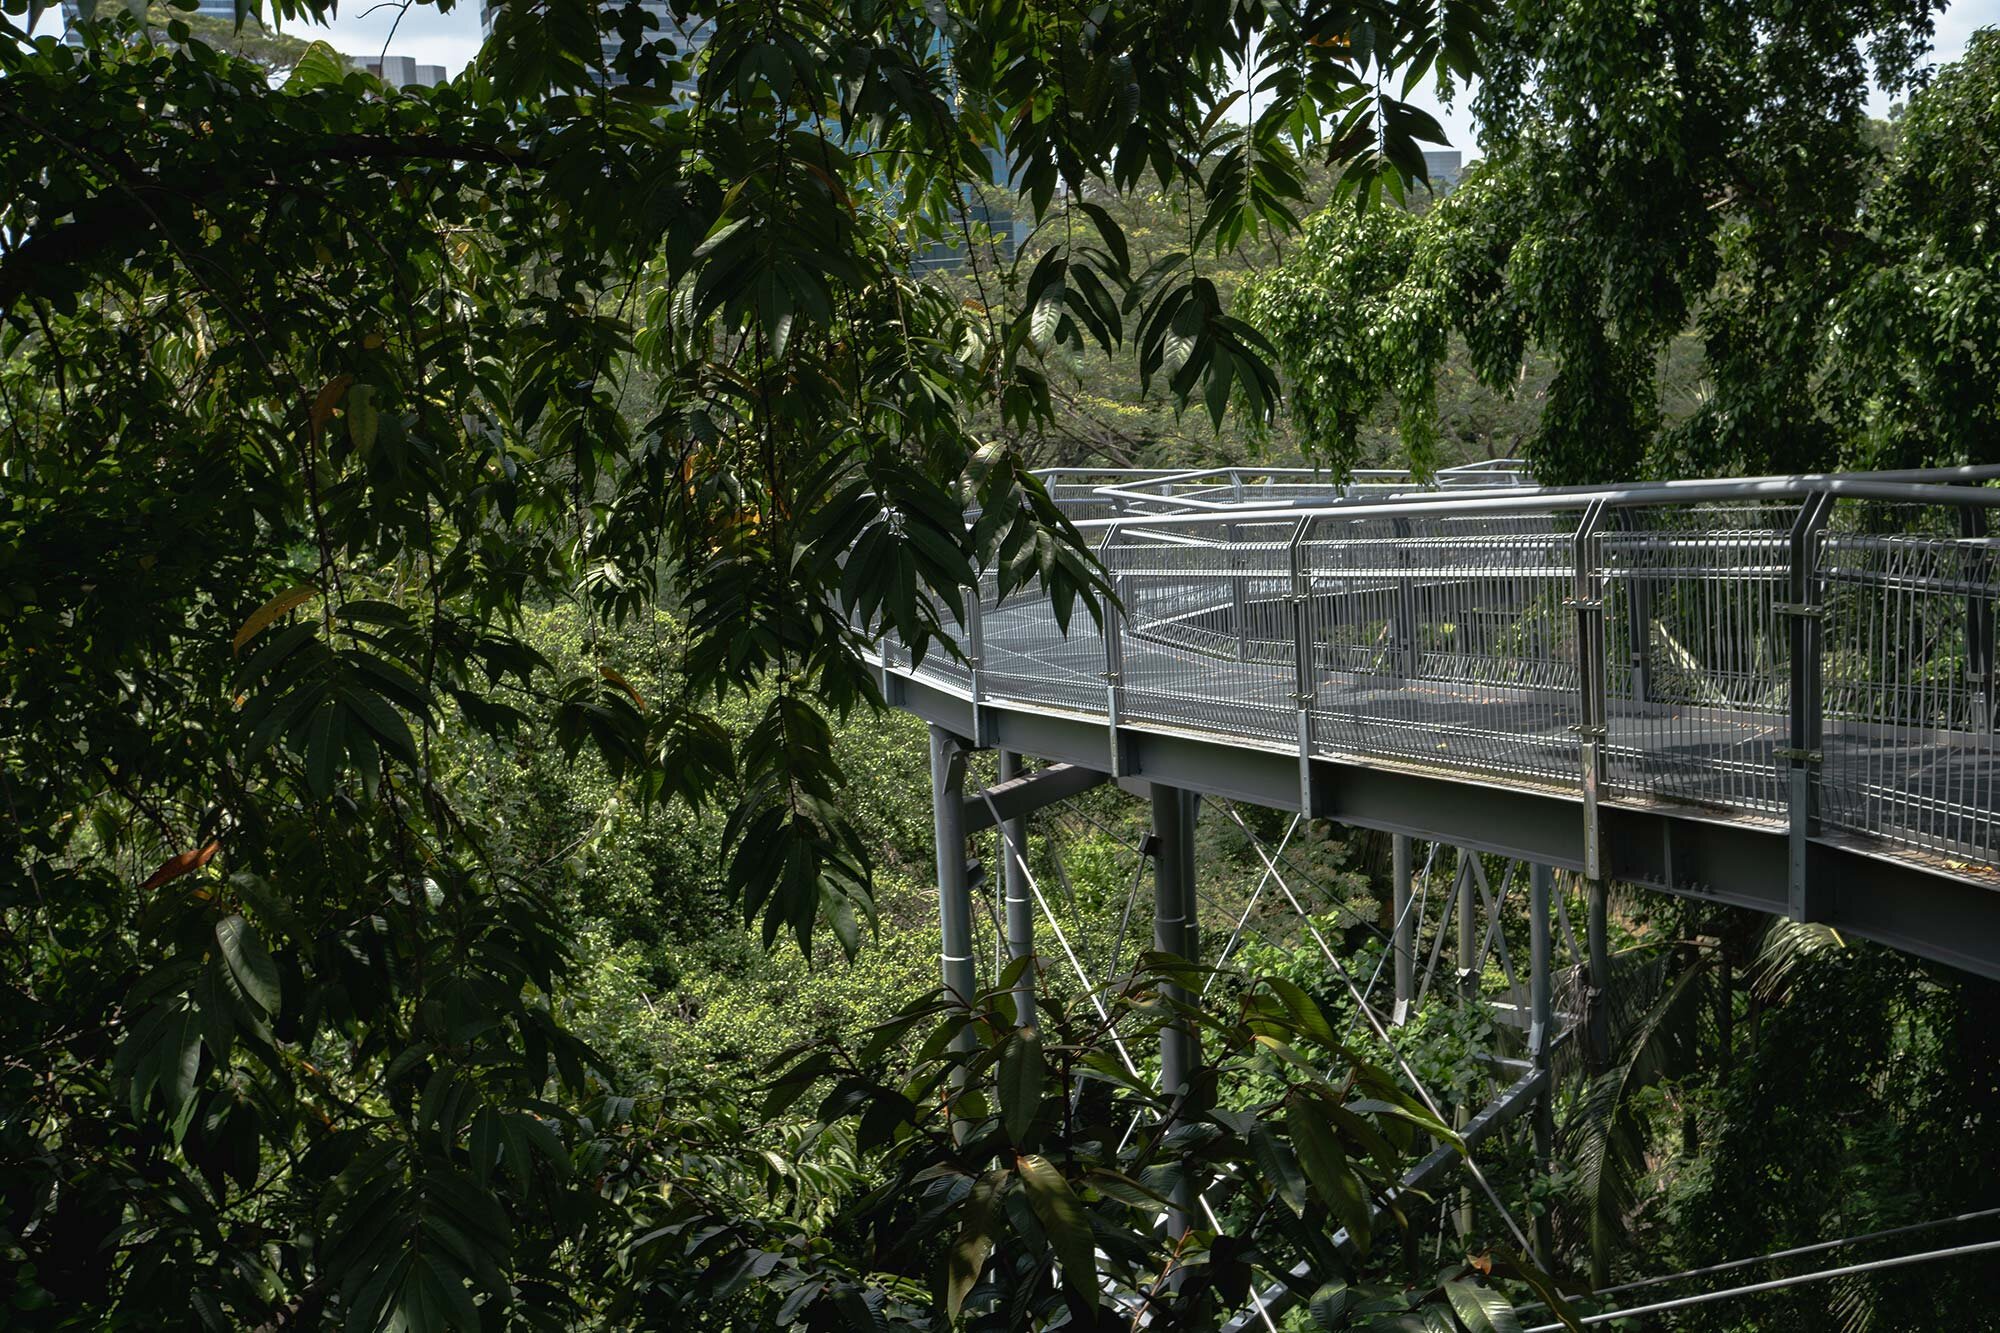 Several parts of the trail are suspended high above the jungle, offering great views of the often surreal contrast between Singapore's ultra-modern buildings and the primeval greenery around the trail.